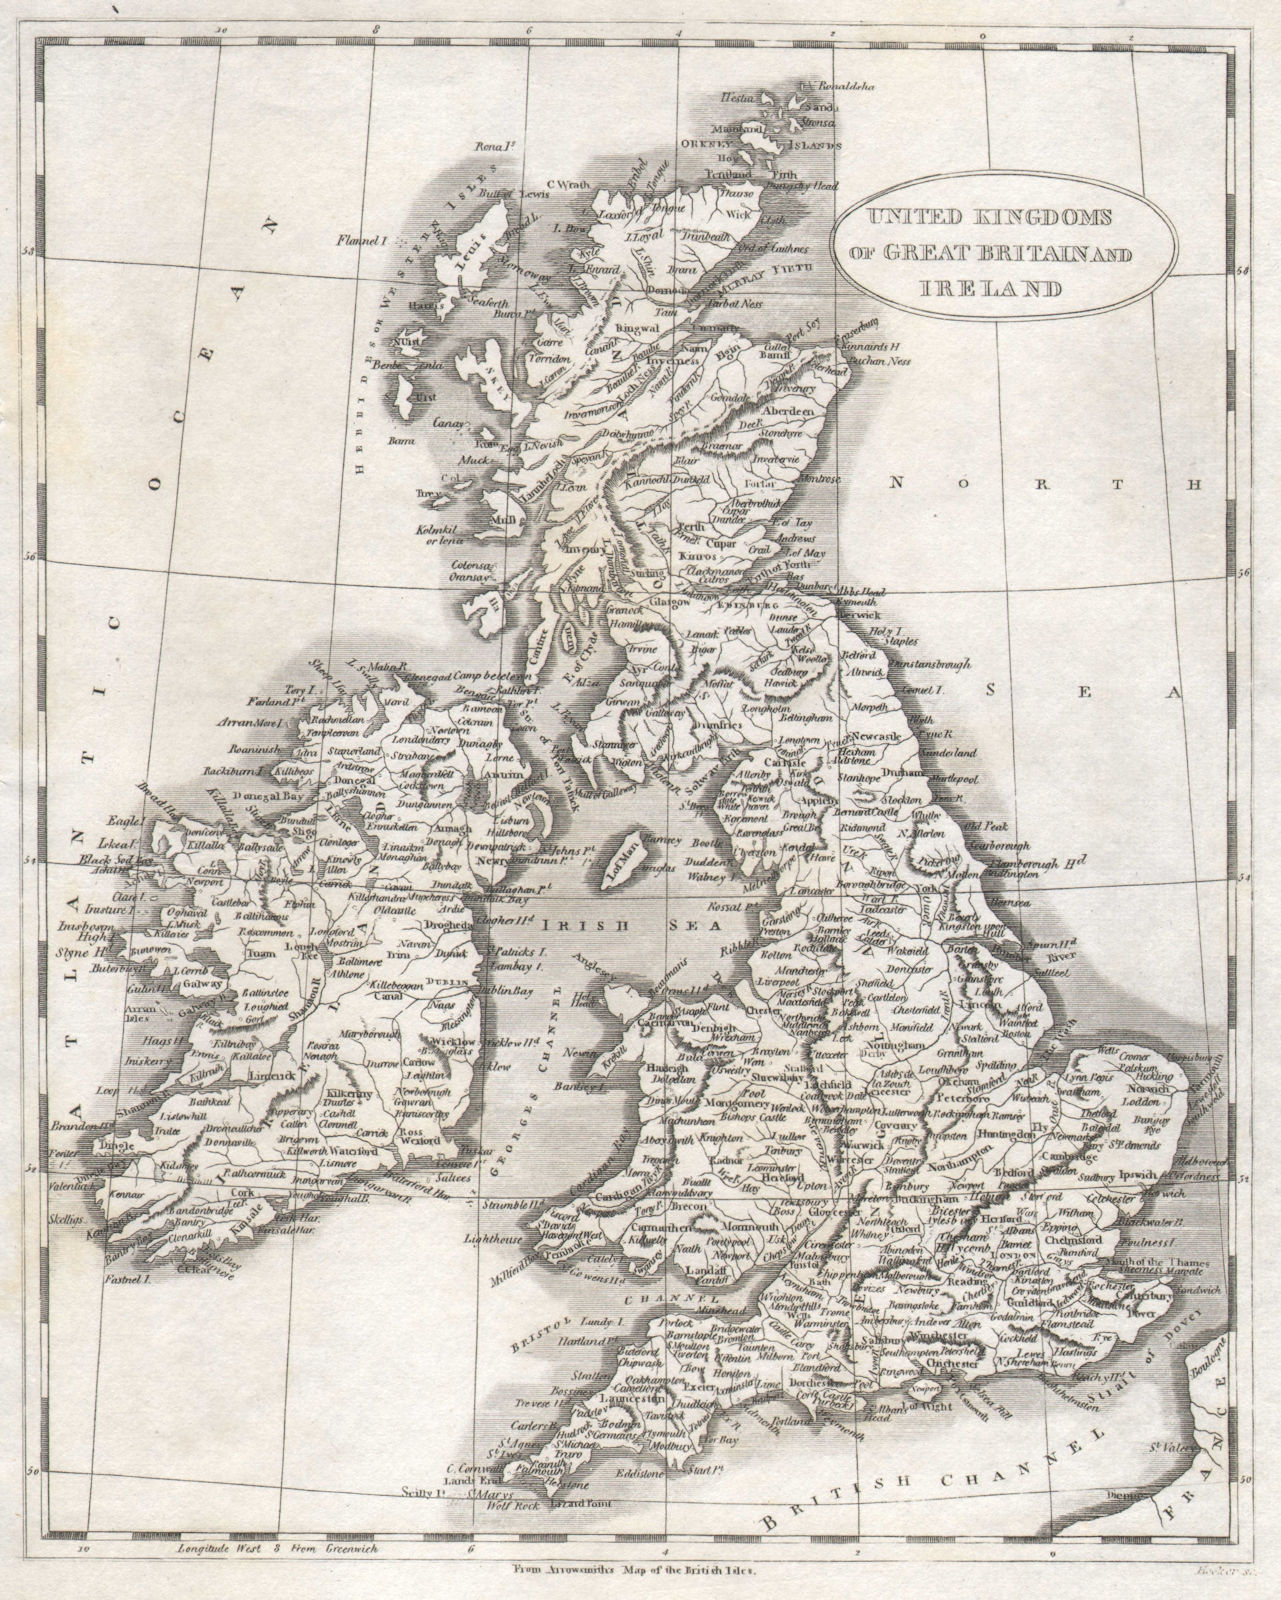 United Kingdoms of Great Britain and Ireland by Arrowsmith & Lewis 1812 map